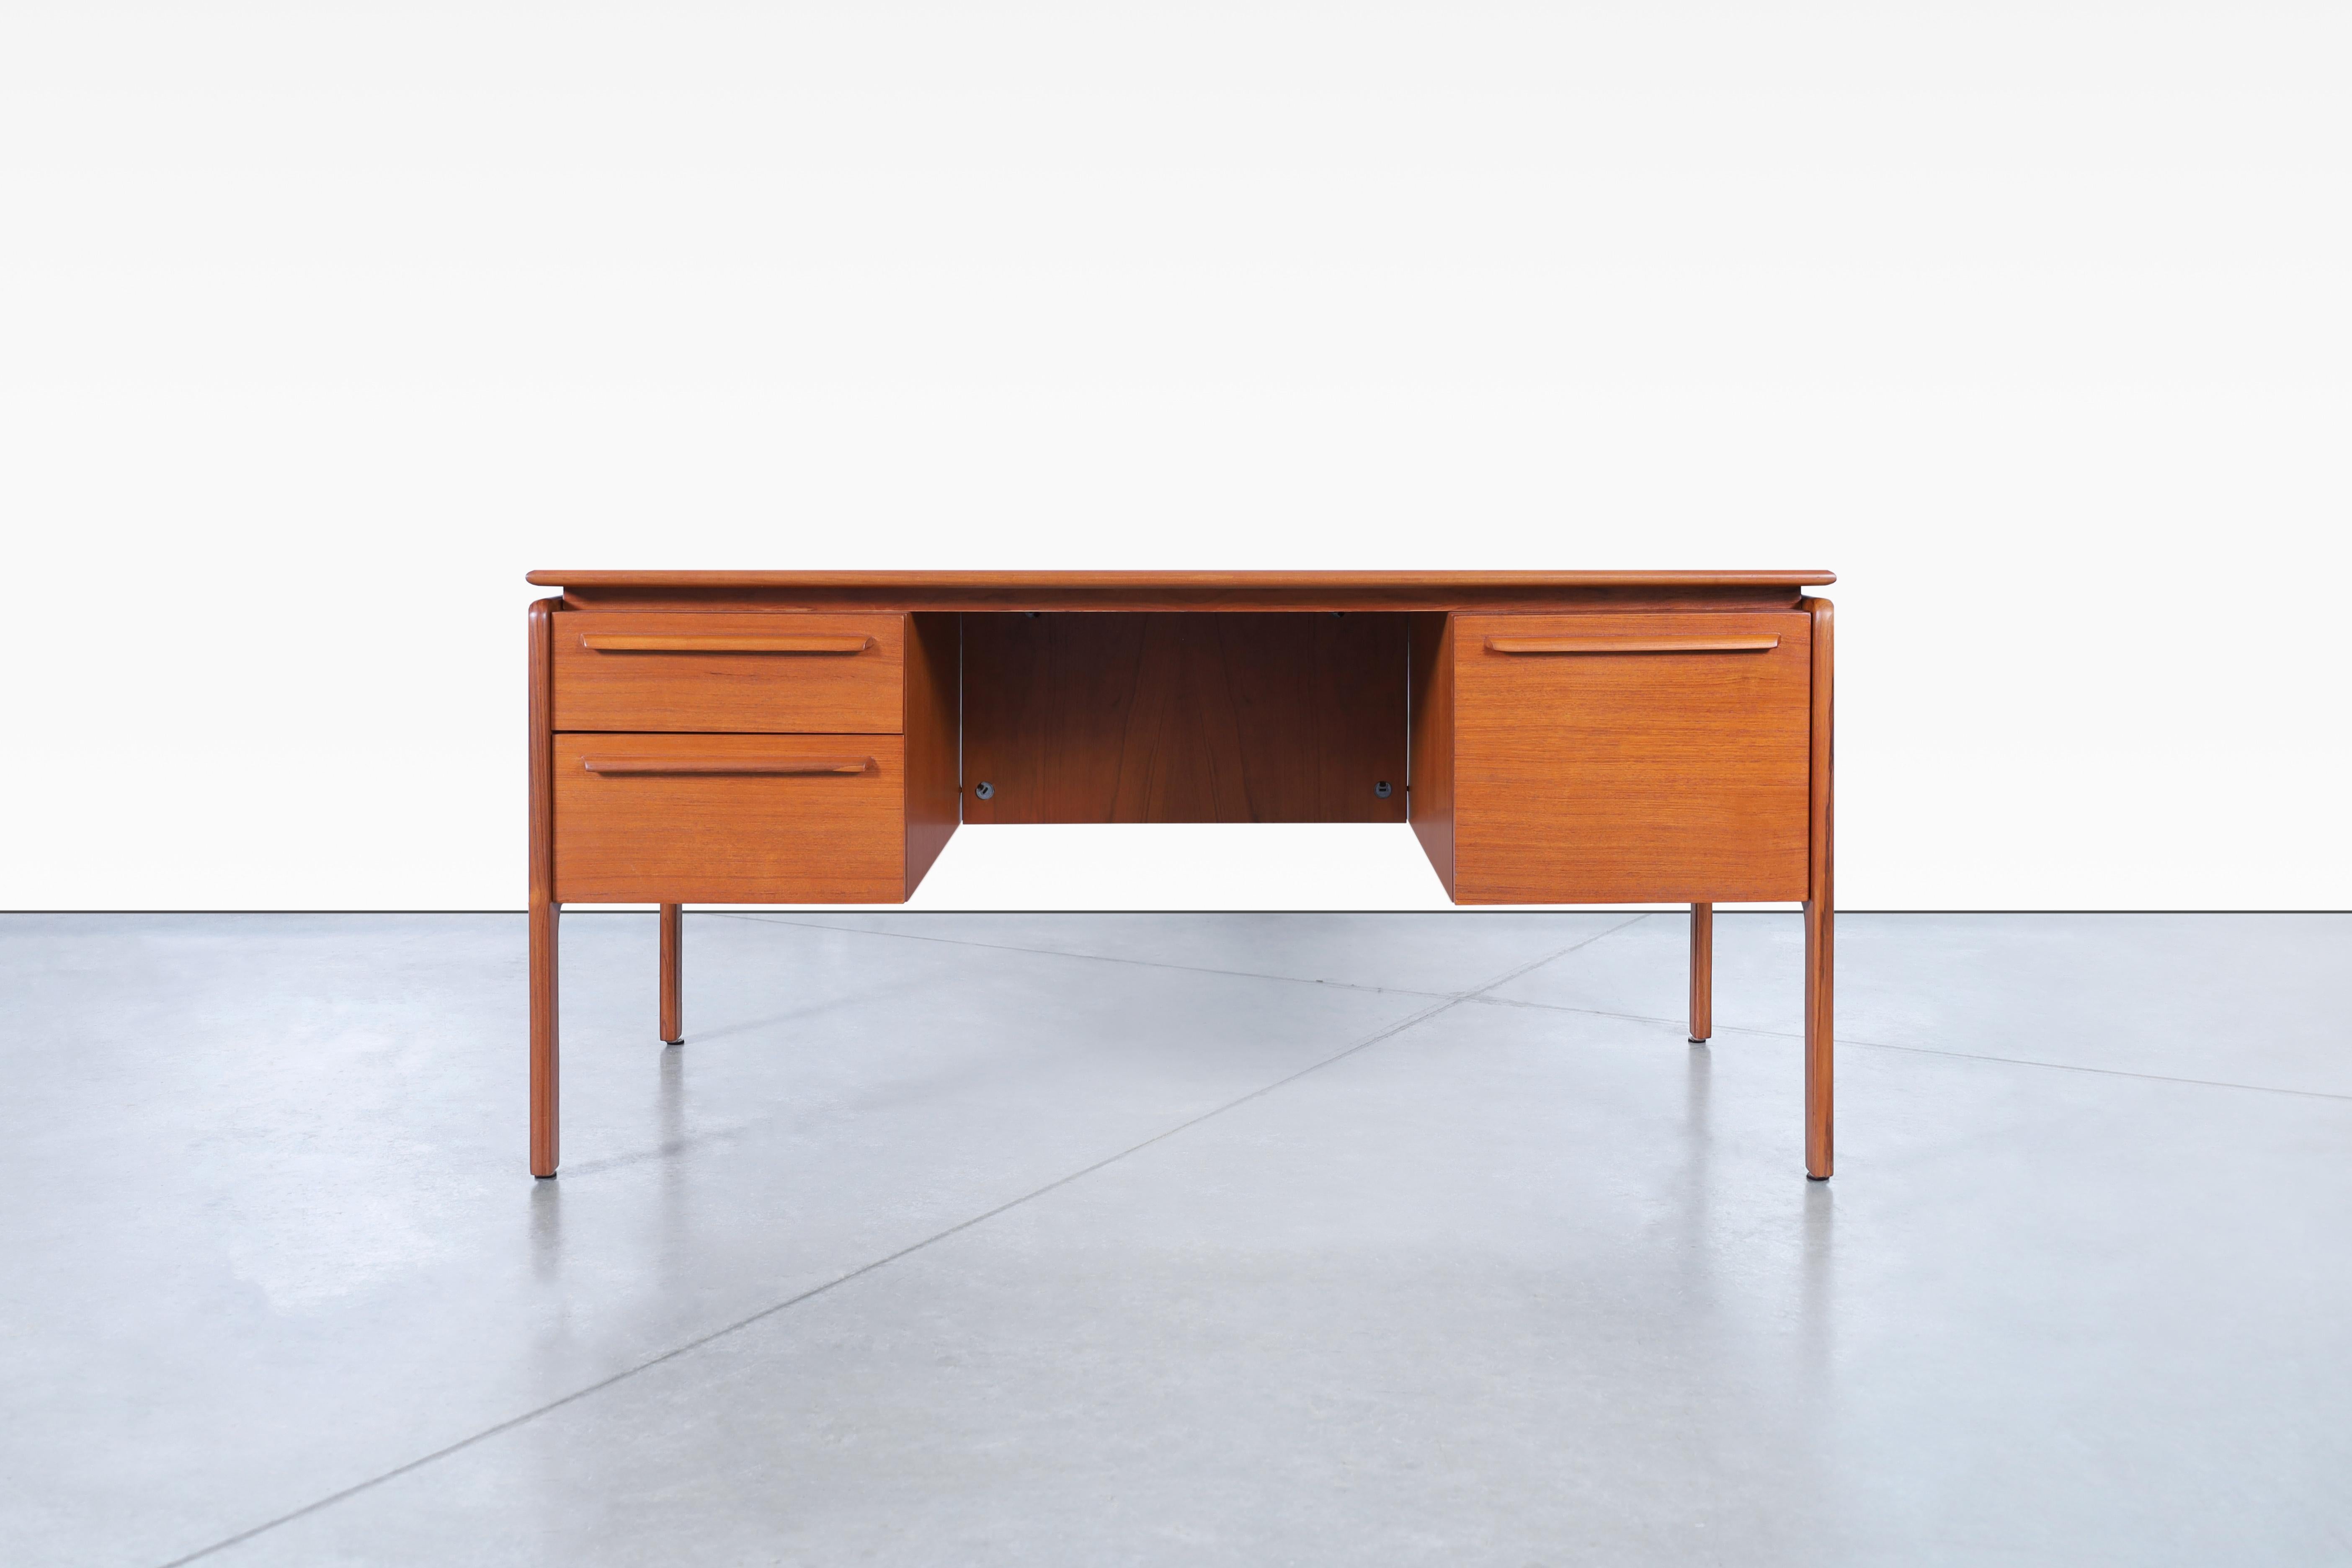 Stunning Danish modern teak desk manufactured by Danflex in Denmark, circa 1960s. This desk has an innovative design where you can appreciate the fine attention to details and the grain that makes up its structure. The left side features two